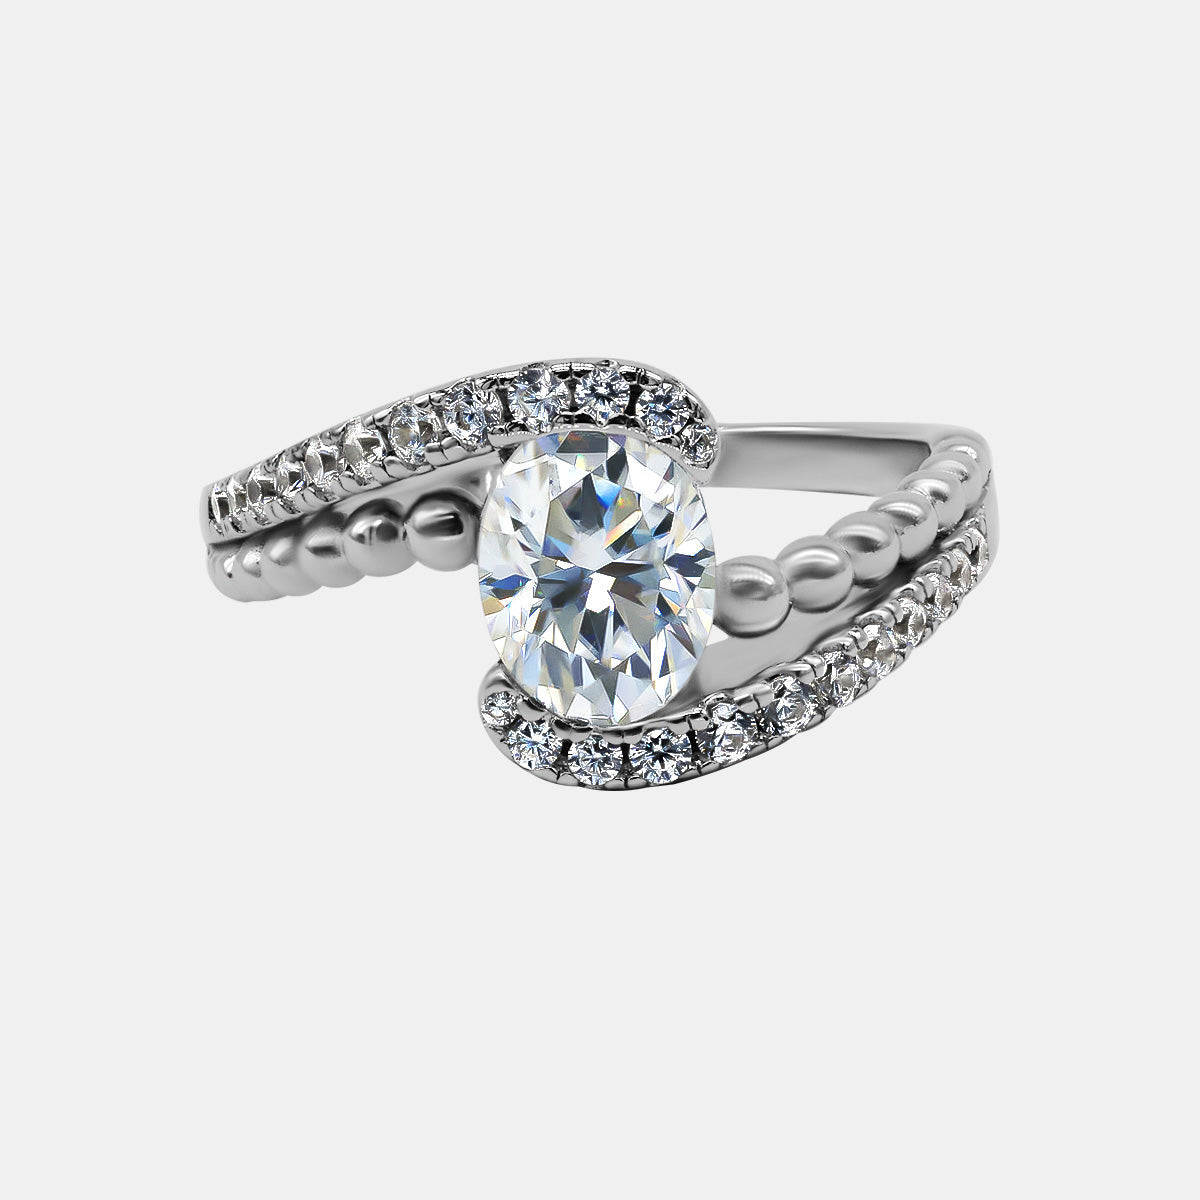 【736】"Heavenly Romance" Hybrid-lined Tension Set 2 Carat Oval Cut Moissanite Ring